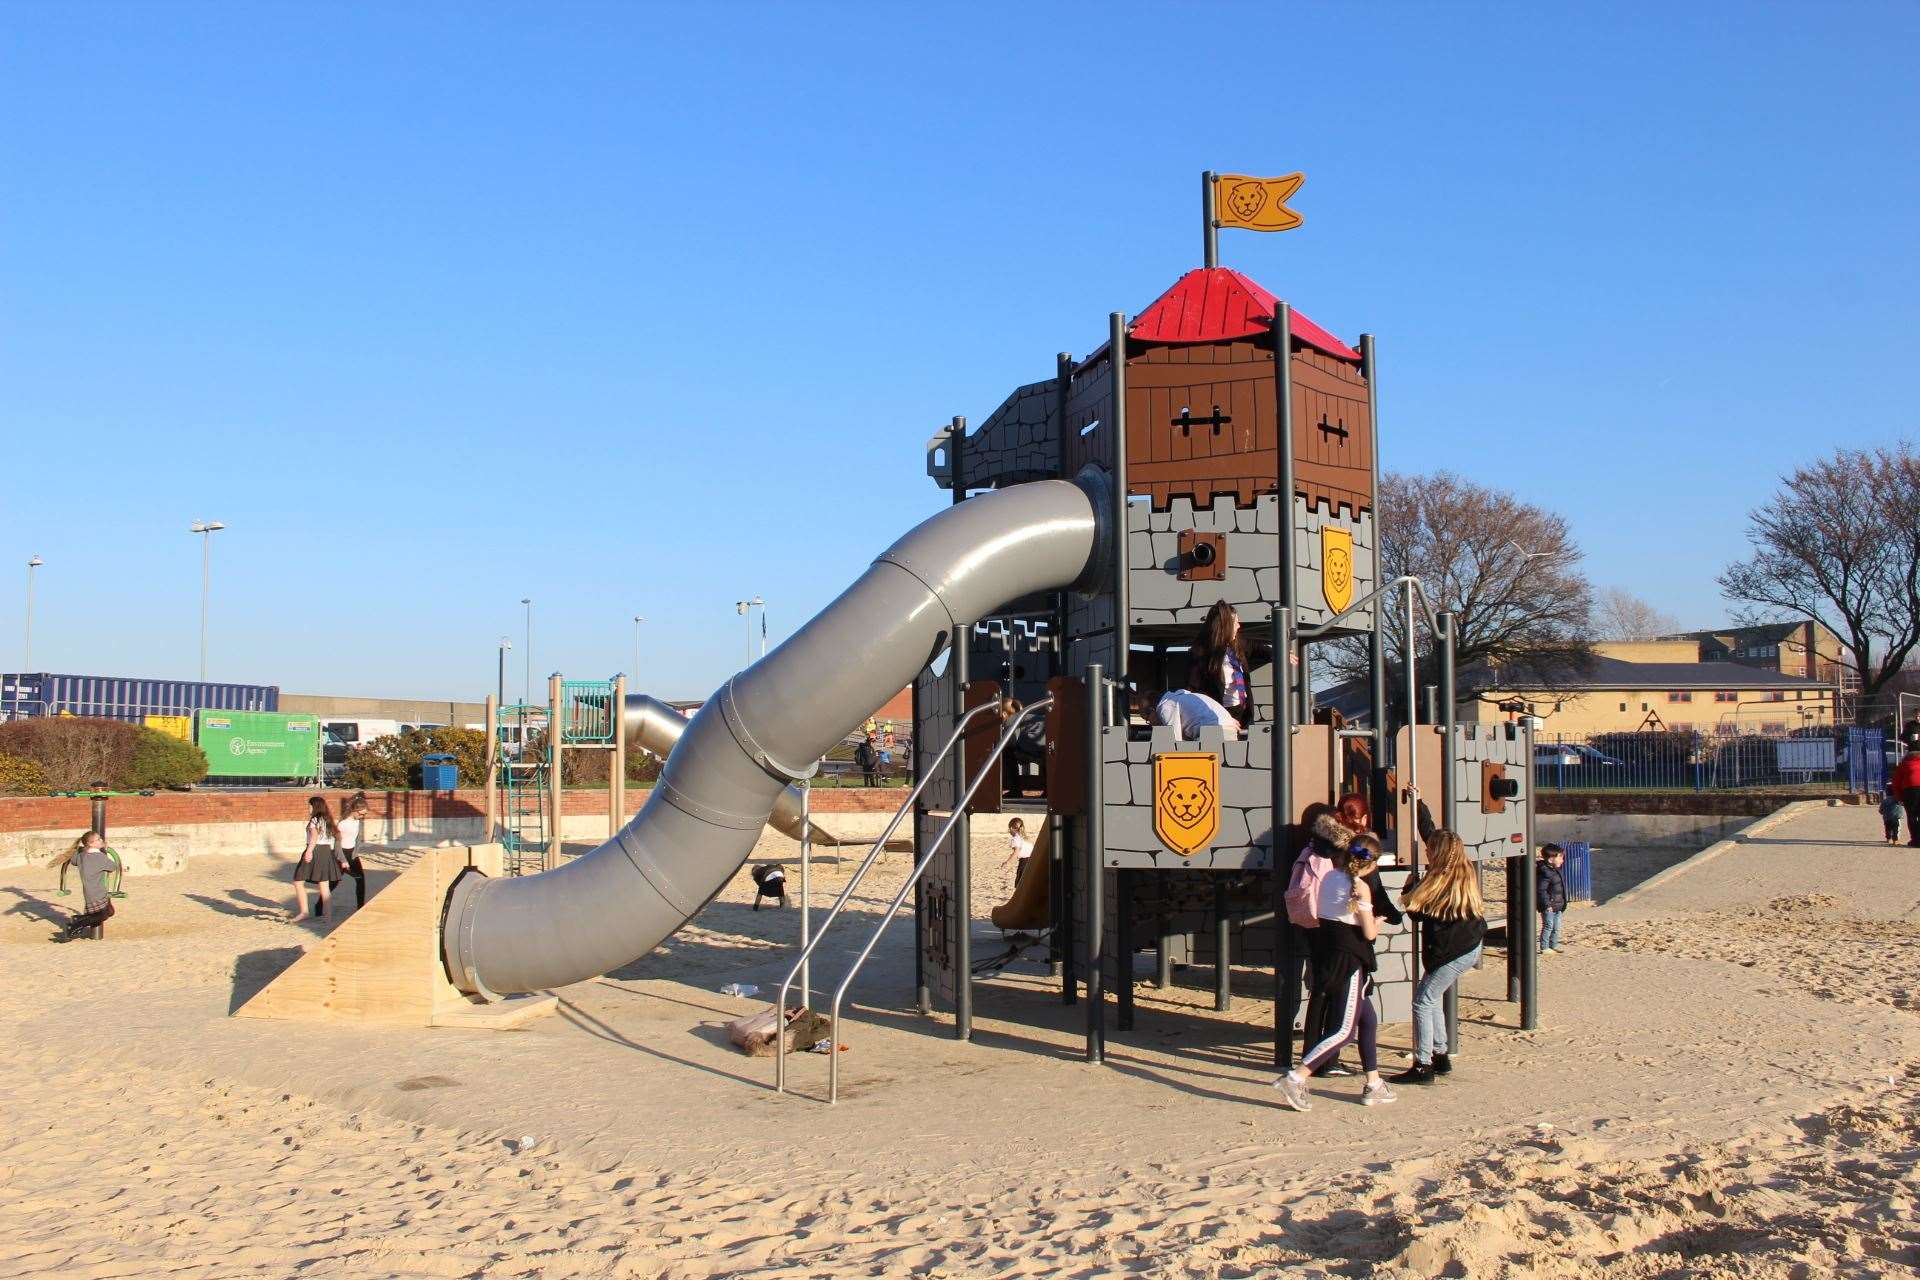 The castle slide at Beachfields, Sheerness, had to be closed and shut off shortly after it was opened